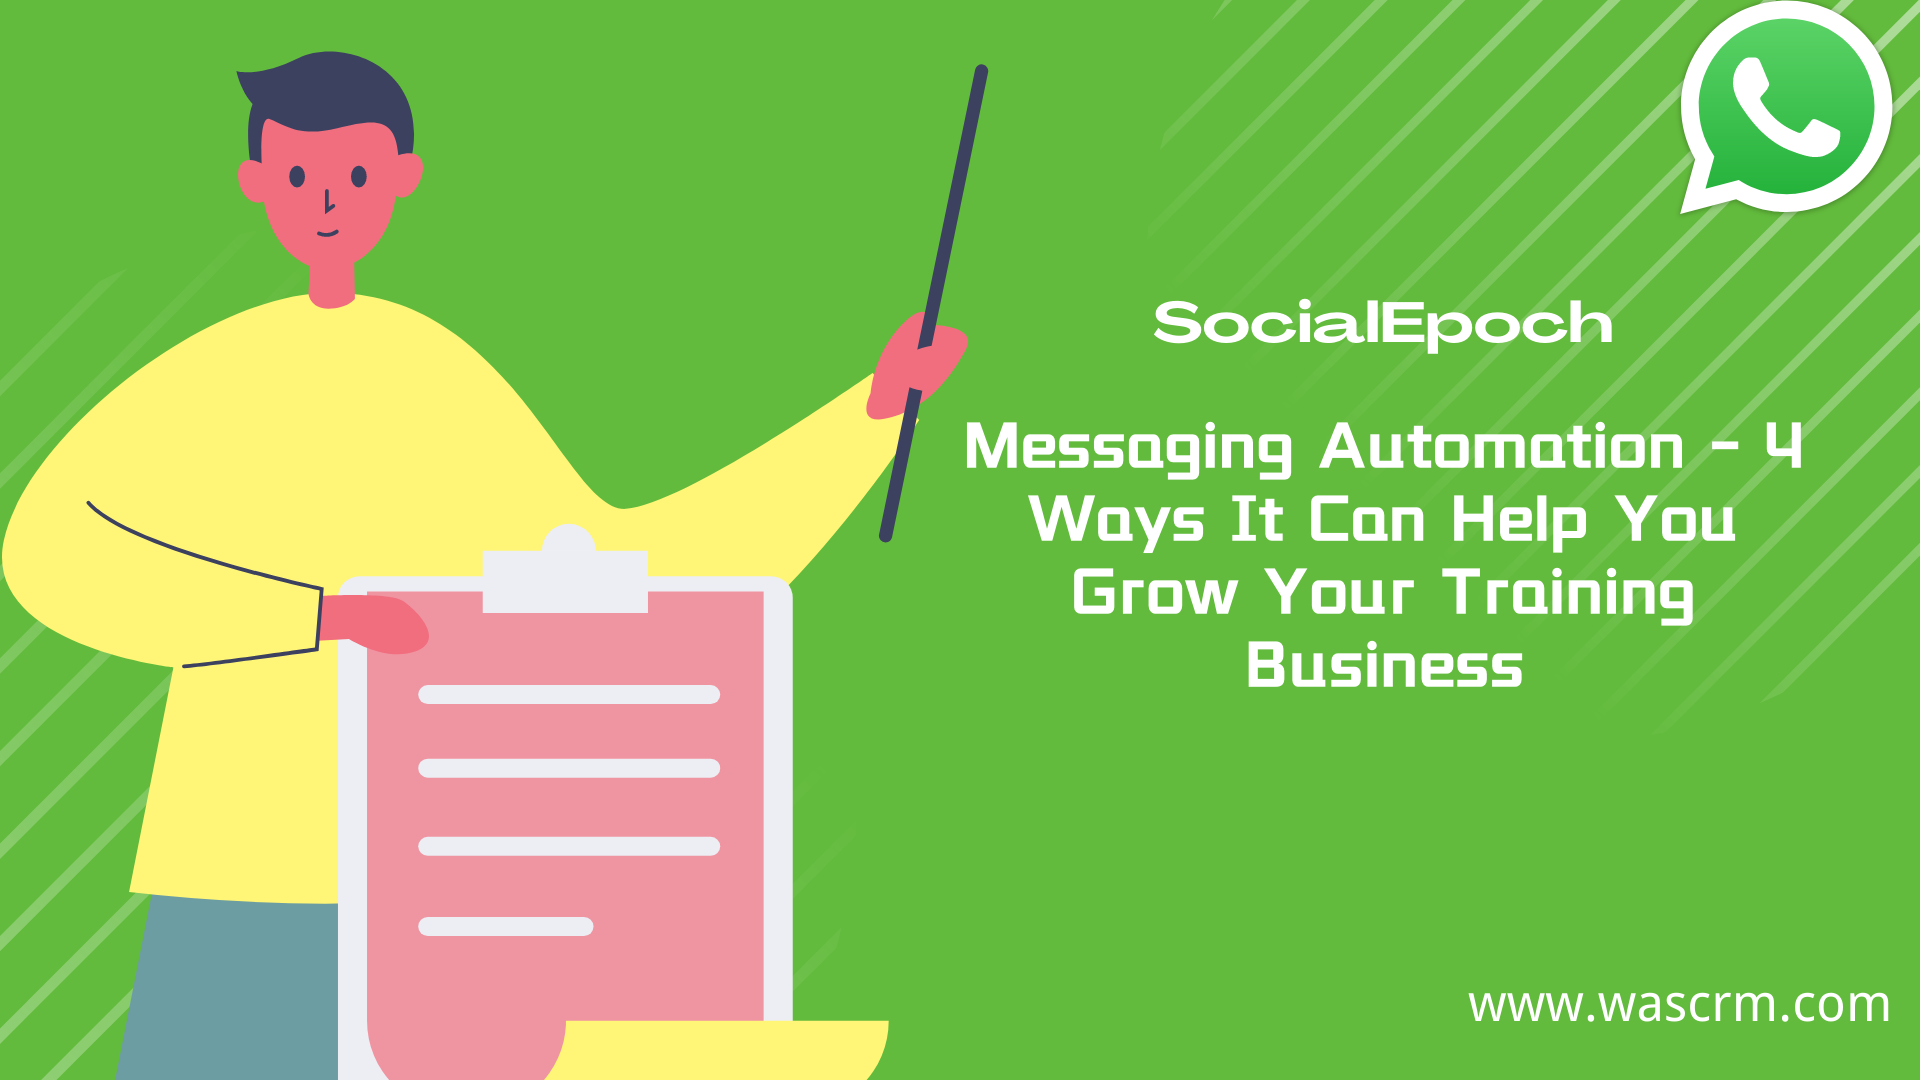 Messaging Automation - 4 Ways It Can Help You Grow Your Training Business